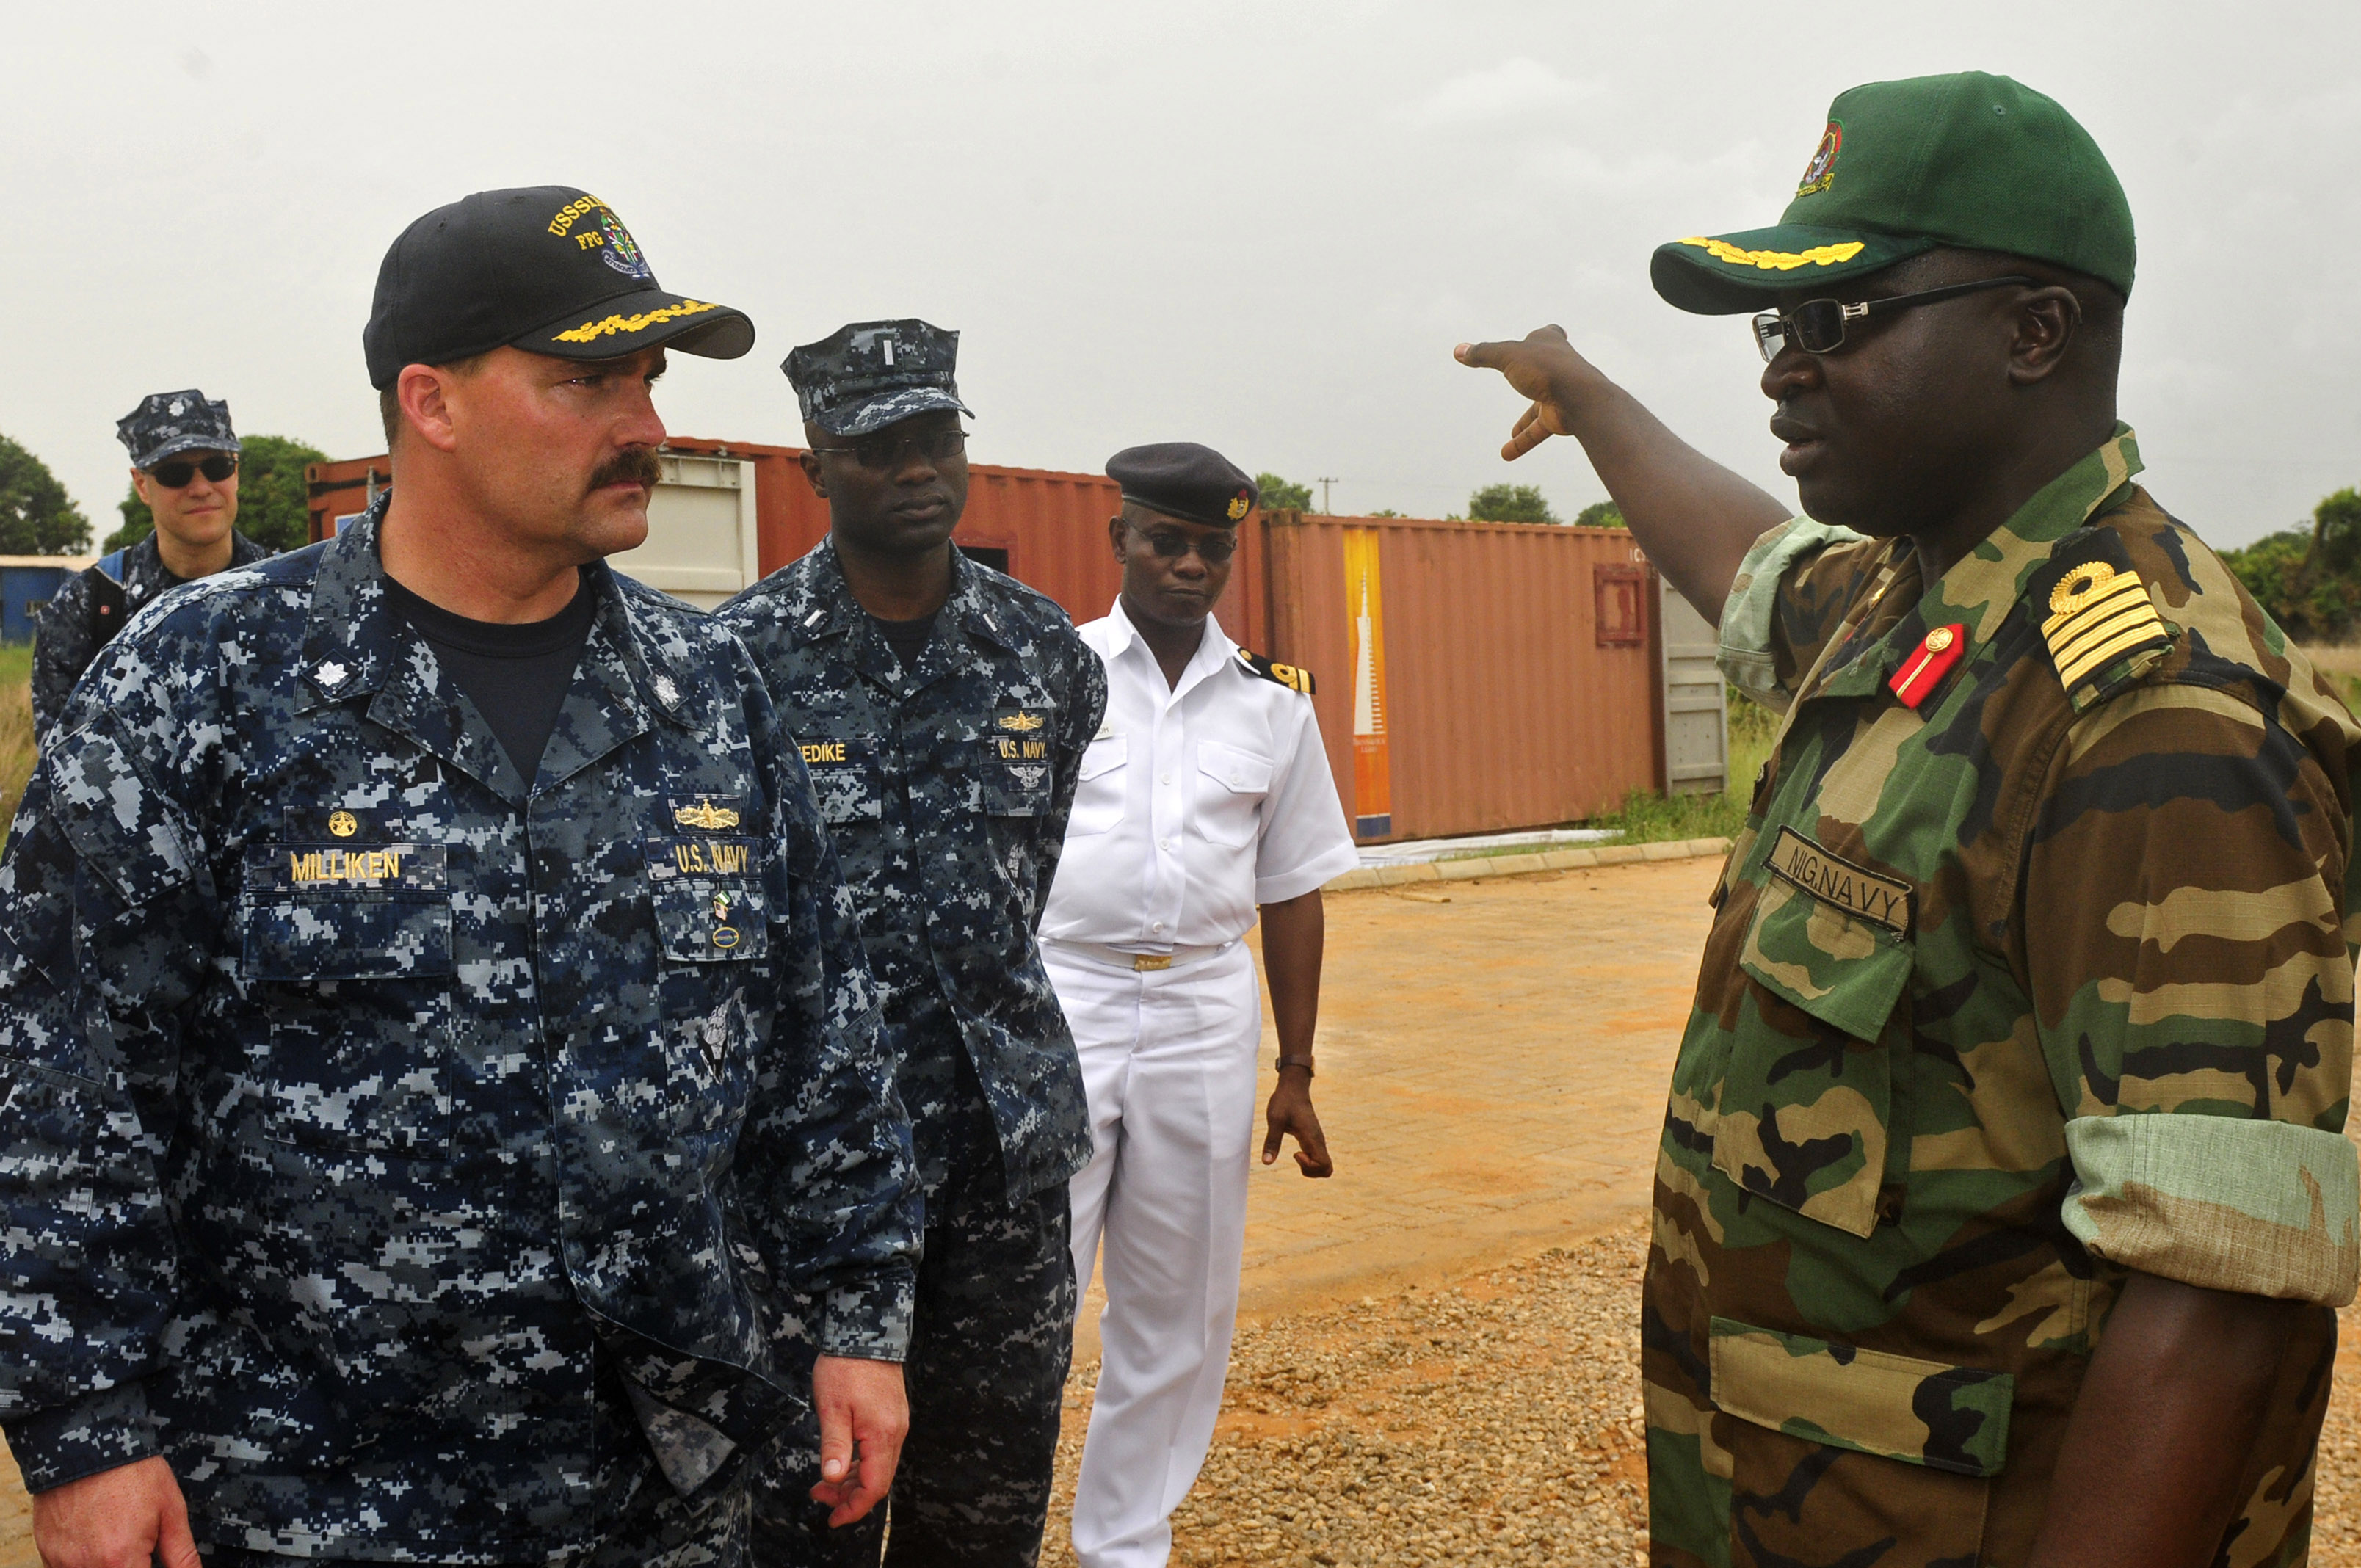 US Navy 120215-N-IZ292-243 Cmdr. Leonard Milliken, commanding officer of the guided-missile frigate USS Simpson (FFG 56), is briefed by Nigerian na